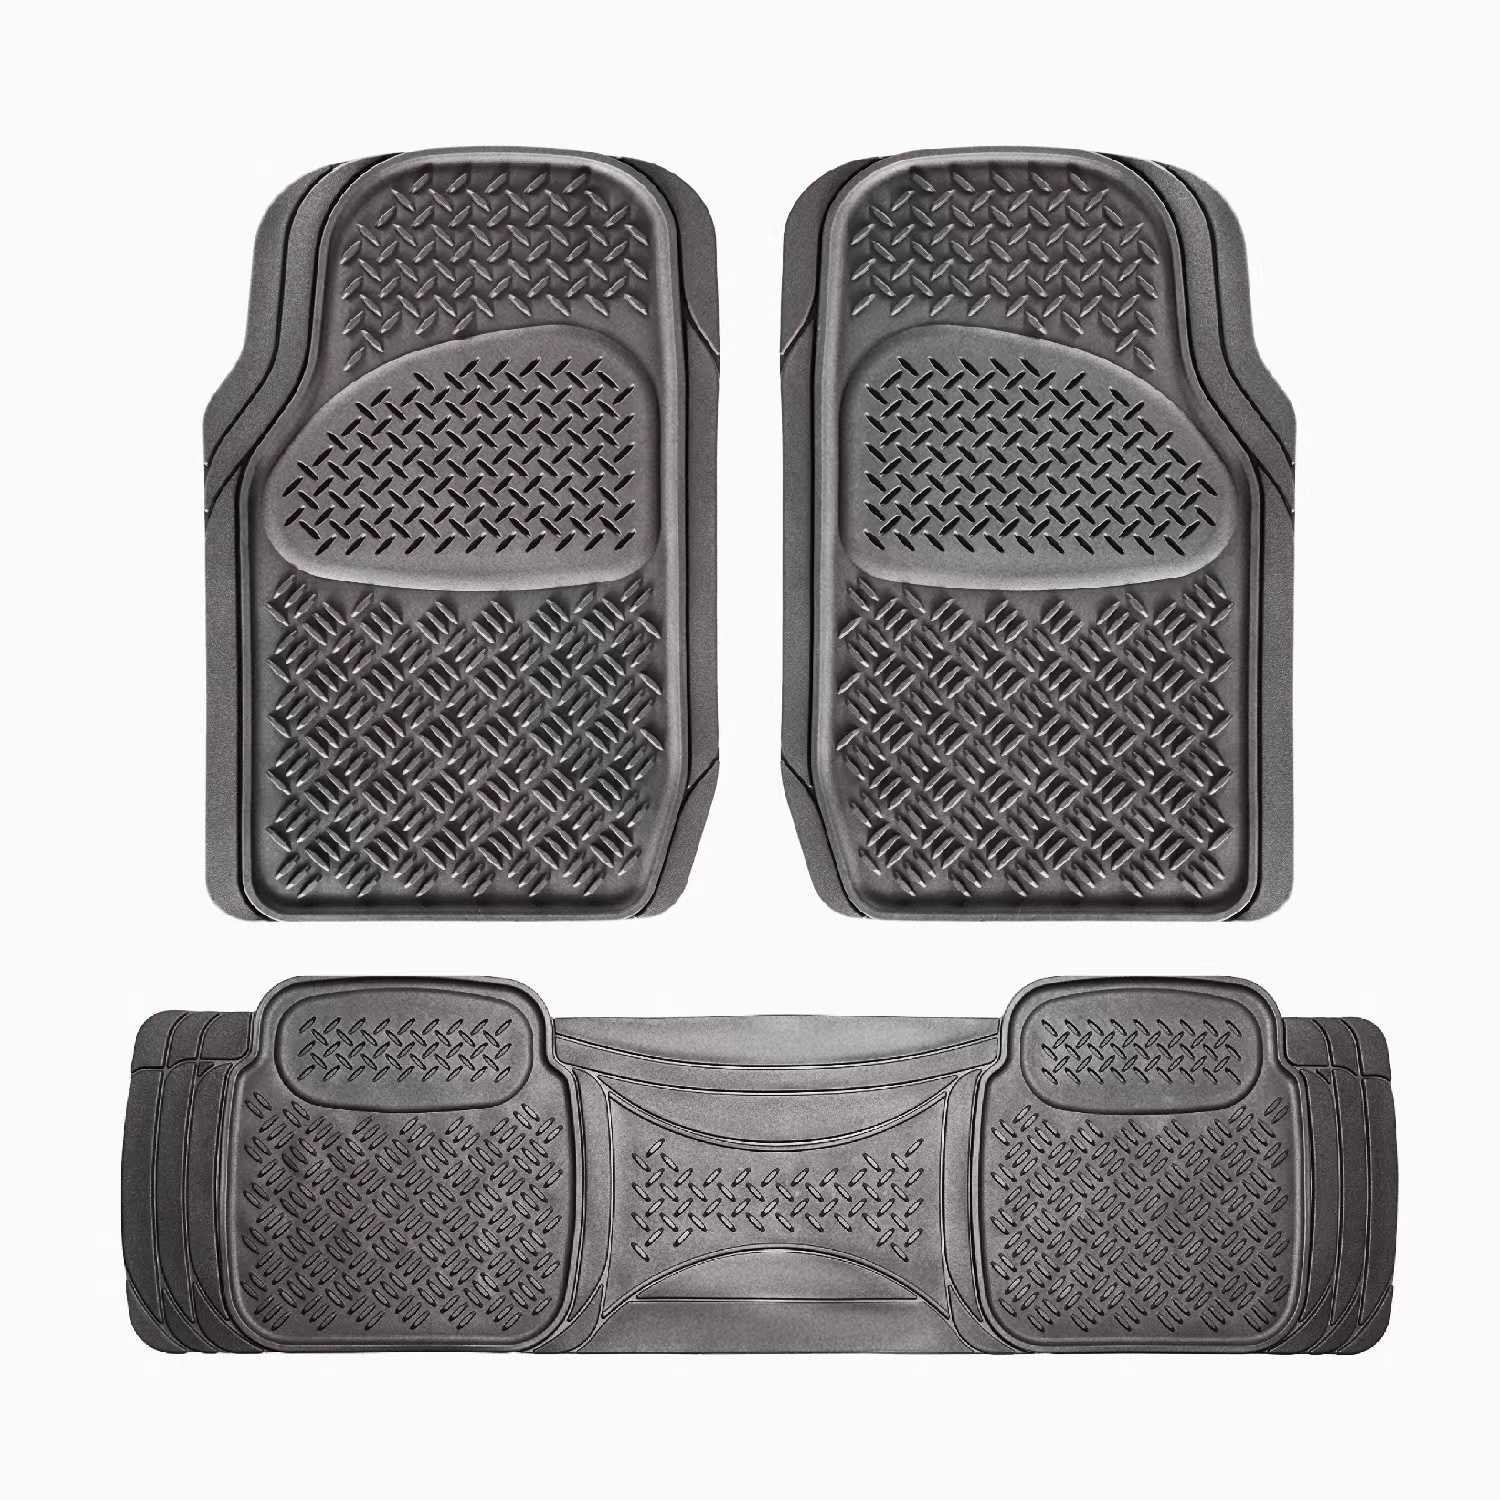 Discover the Essential Utility Room Floor Mats for Easy Organization